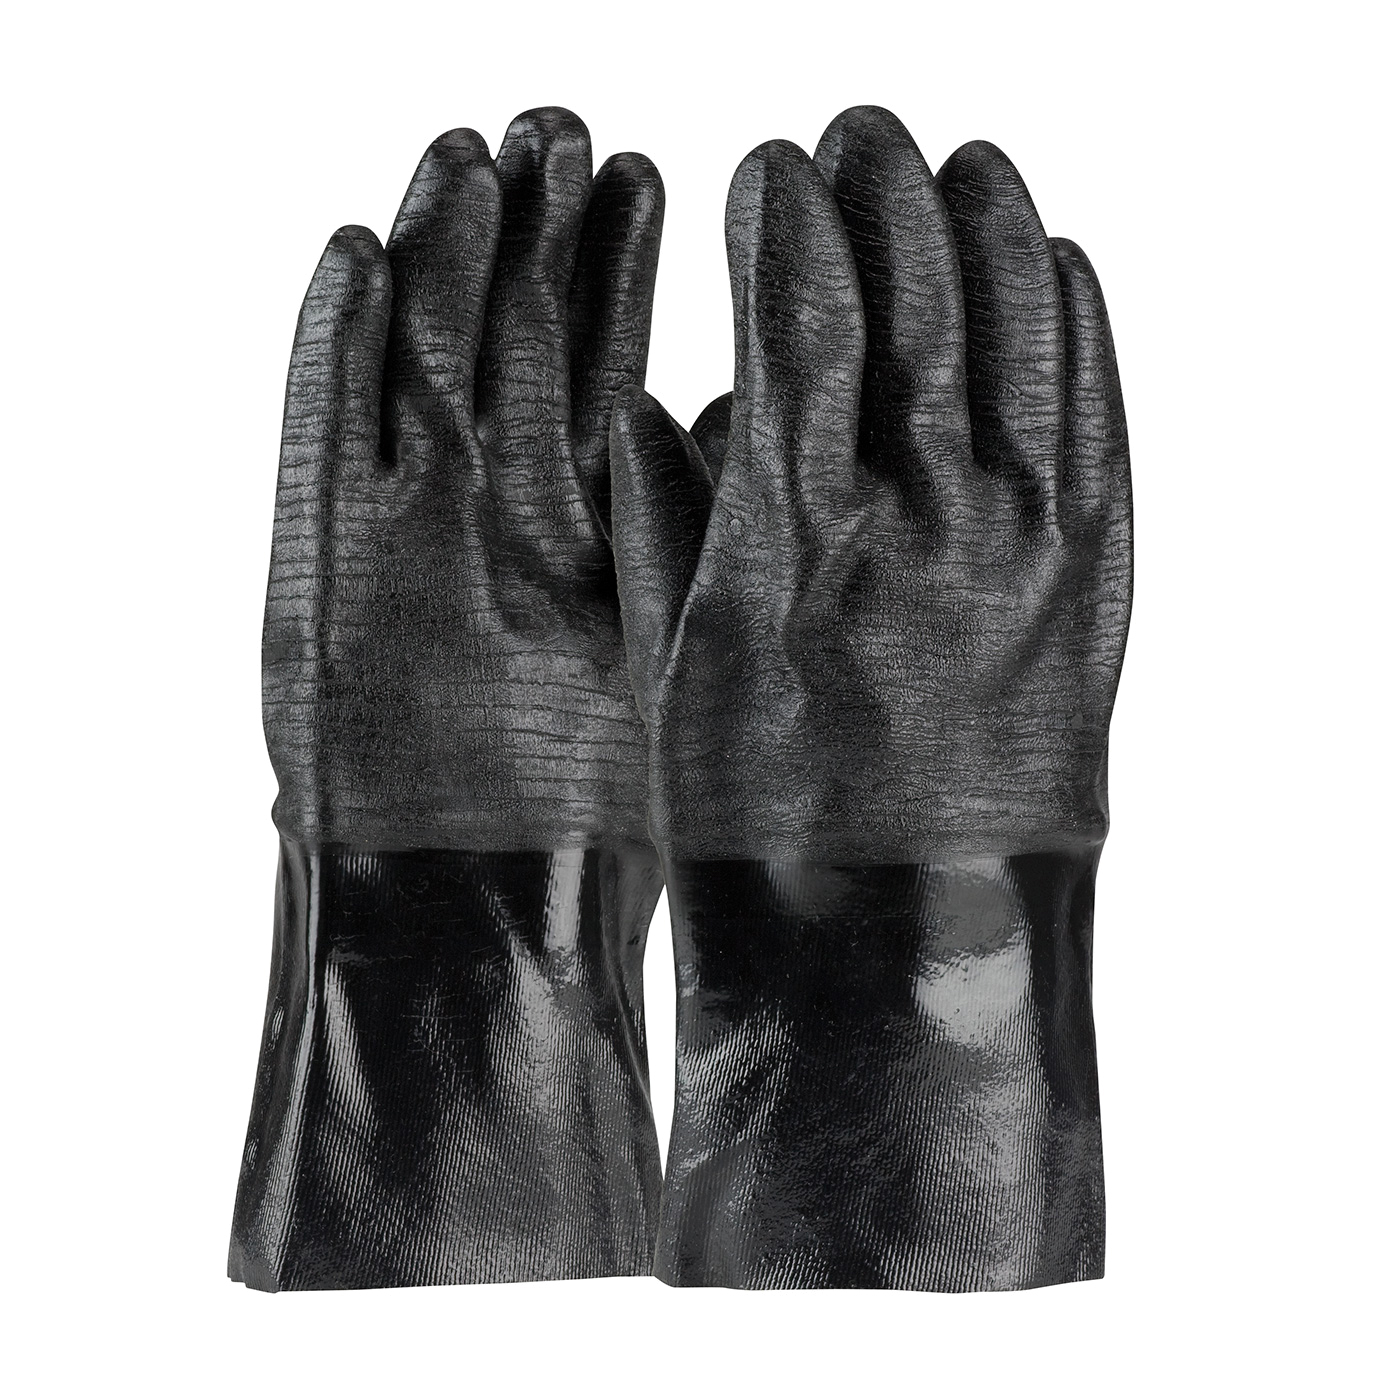 PIP® ChemGrip™ 57-8630R Coated Chemical-Resistant Gloves, L, Cotton, Black, Cotton Interlock Knit Lining, 12 in L, Resists: Abrasion, Acid, Alkaline, Caustic, Cold, Cut, Grease, Heat, Liquid, Oil, Puncture, Solvent and Tear, Supported Support, 2 mm THK